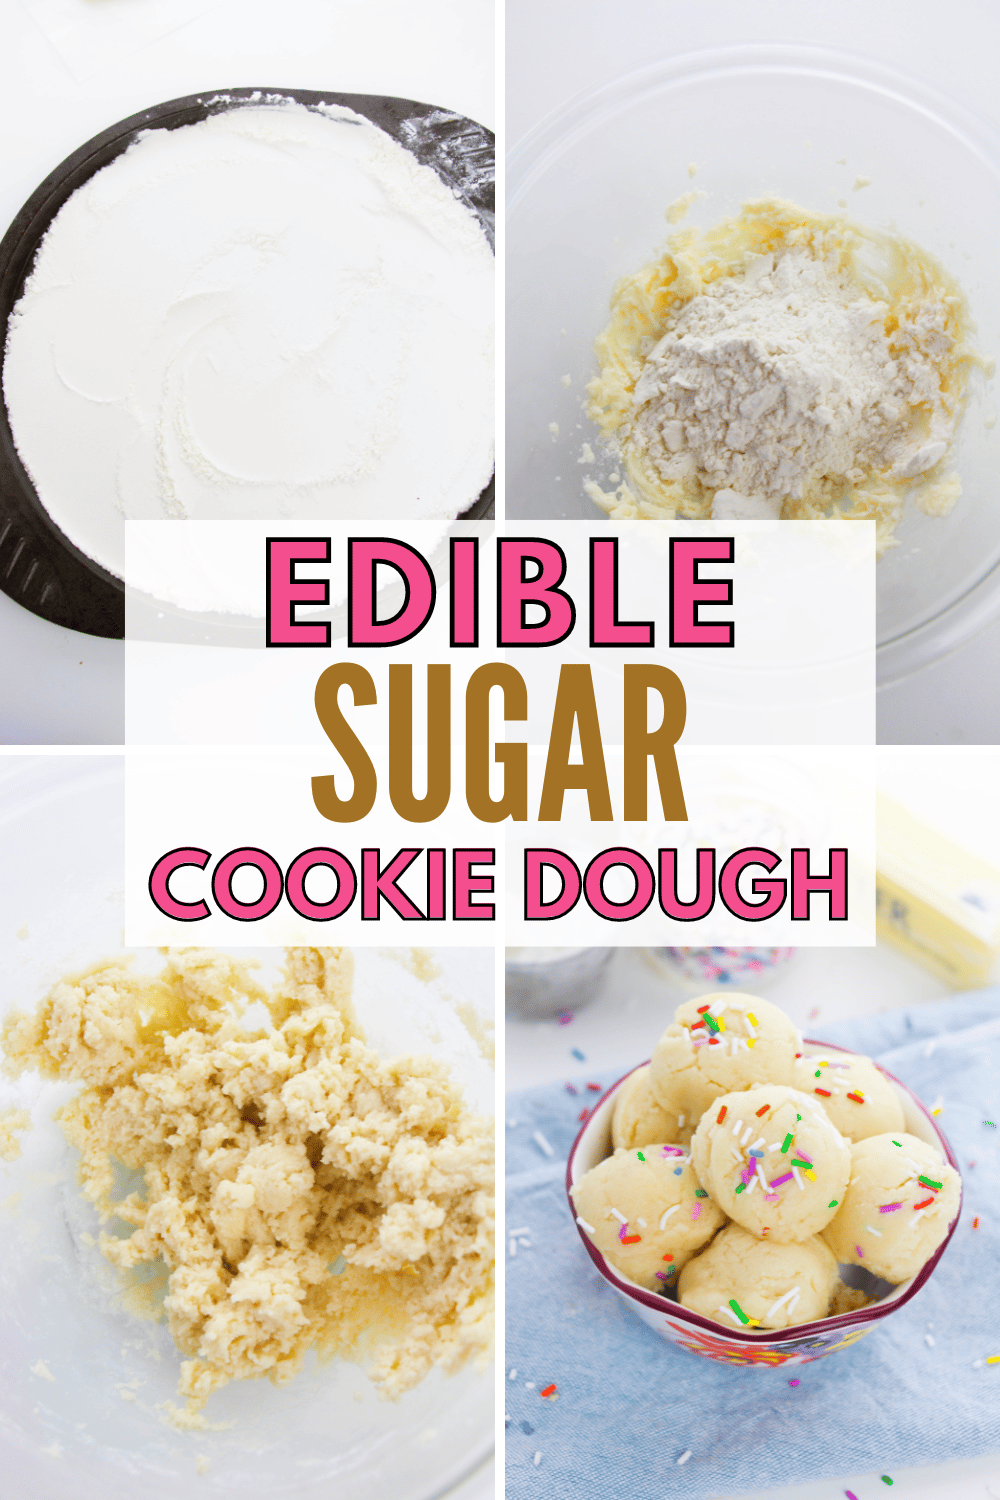 This Edible Sugar Cookie Dough is a safe-to-eat cookie dough perfect for satisfying your sweet tooth! It can be customized to your liking. #ediblesugarcookiedough #ediblecookiedough #cookiedough #sugarcookie via @wondermomwannab